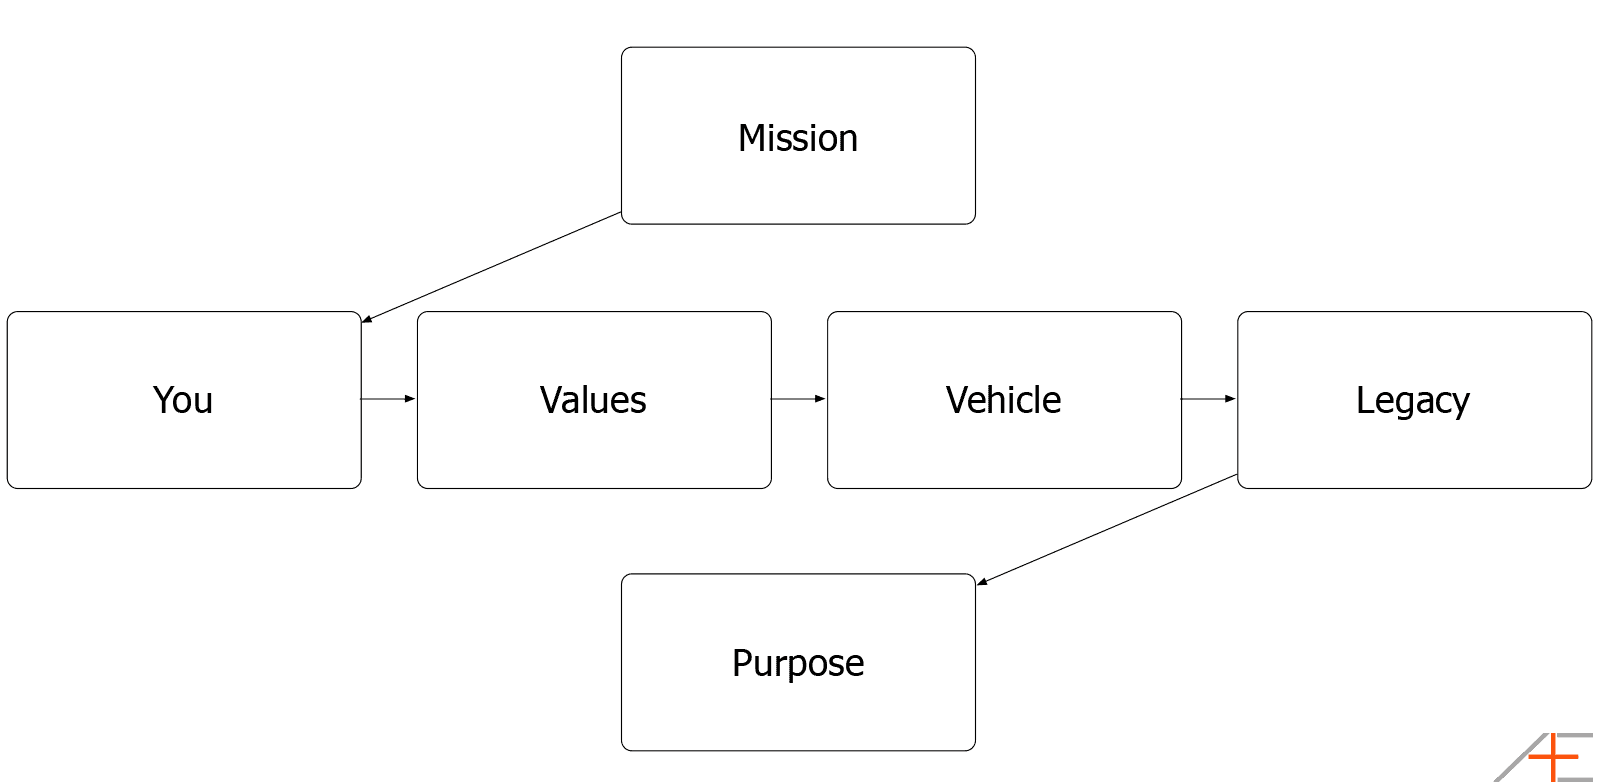 Mission, Purpose, Values, Legacy Stages